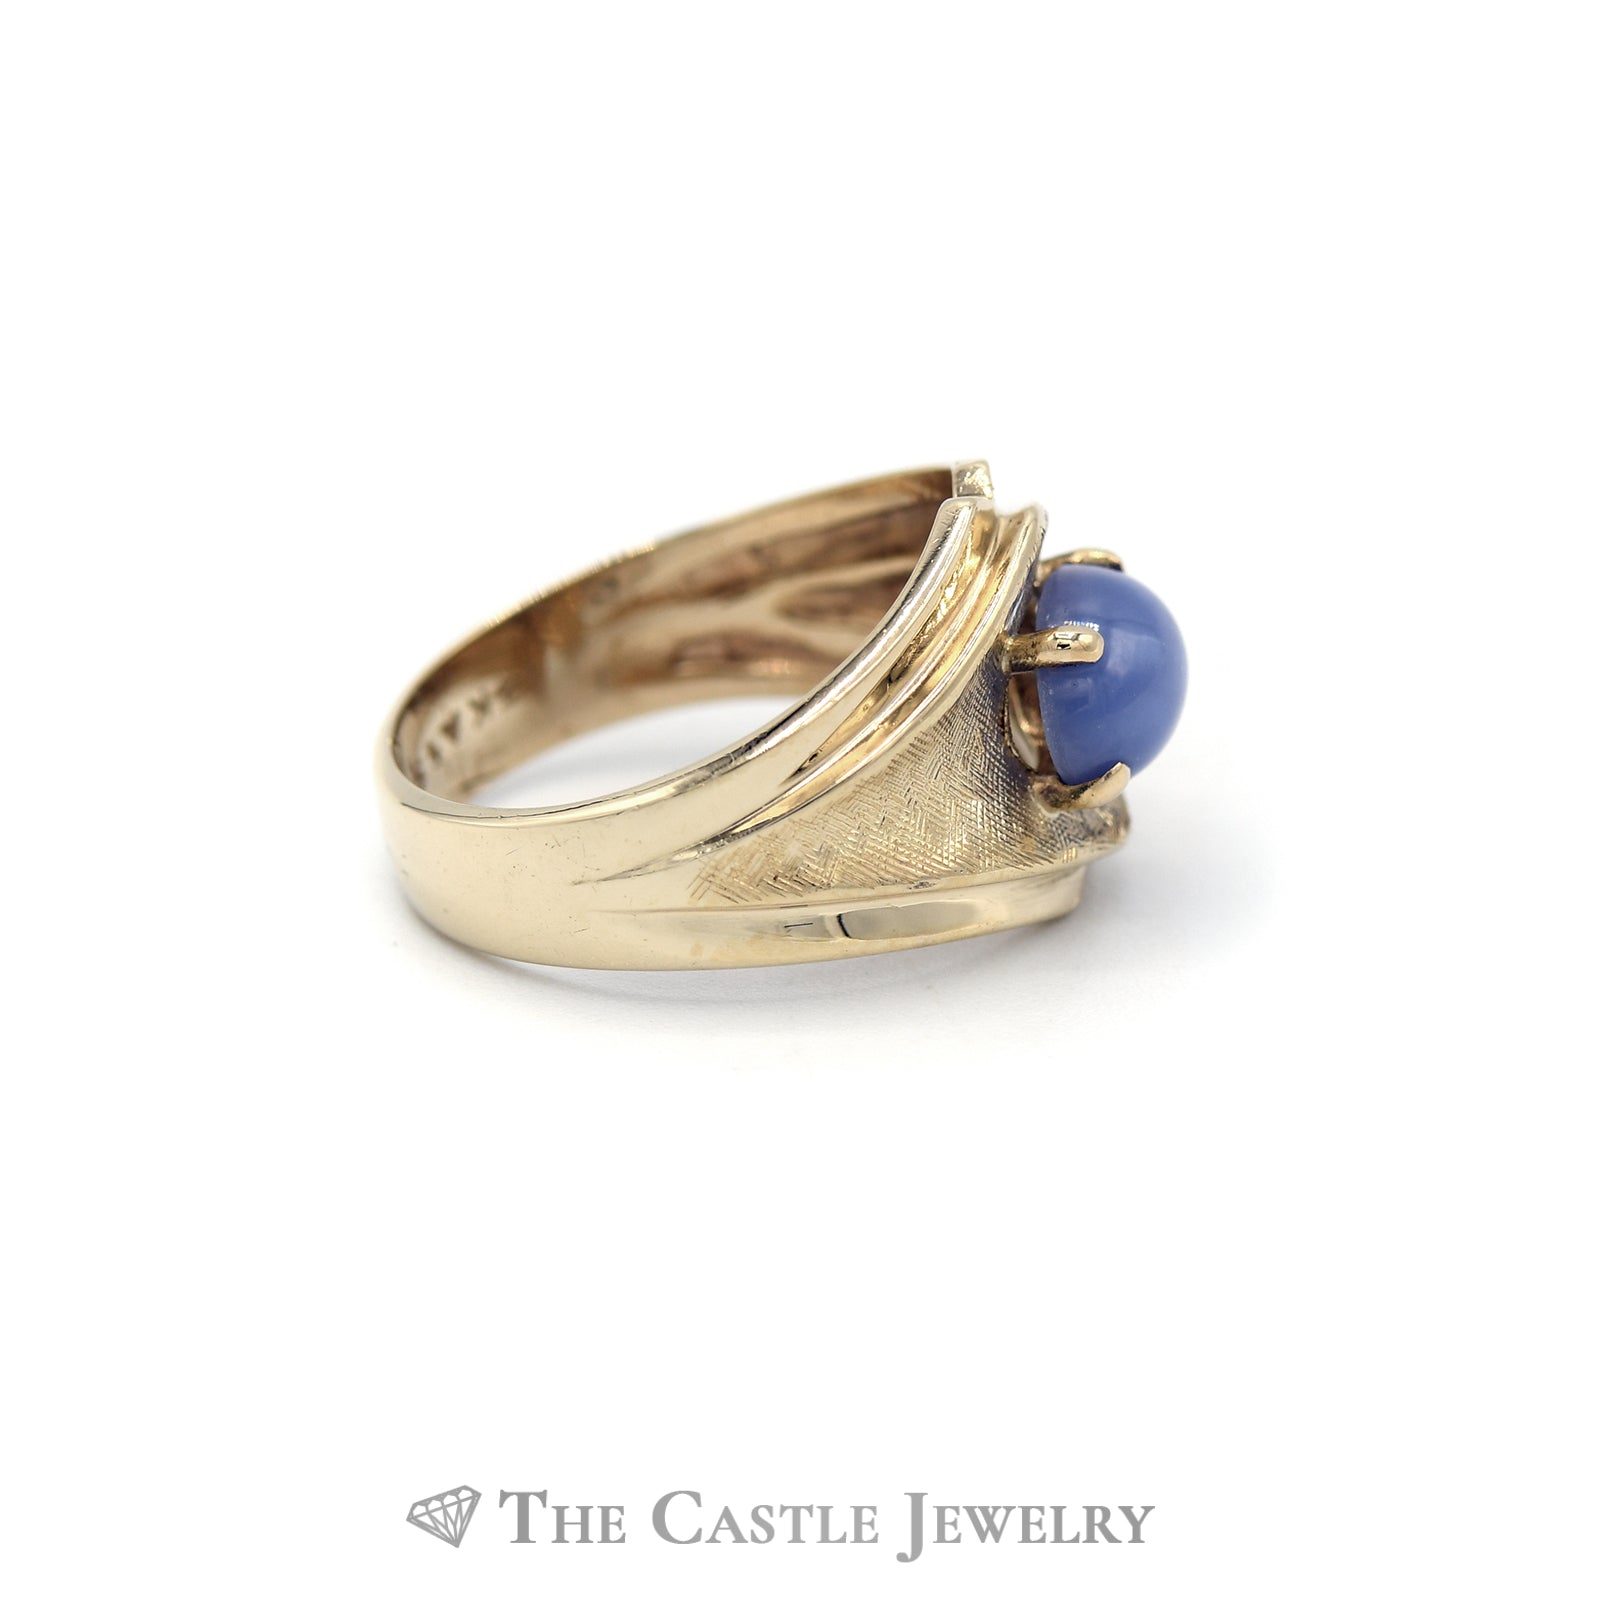 Cabochon Lindy Start Ring with Concaved Designed Mounting in 14KT Yellow Gold